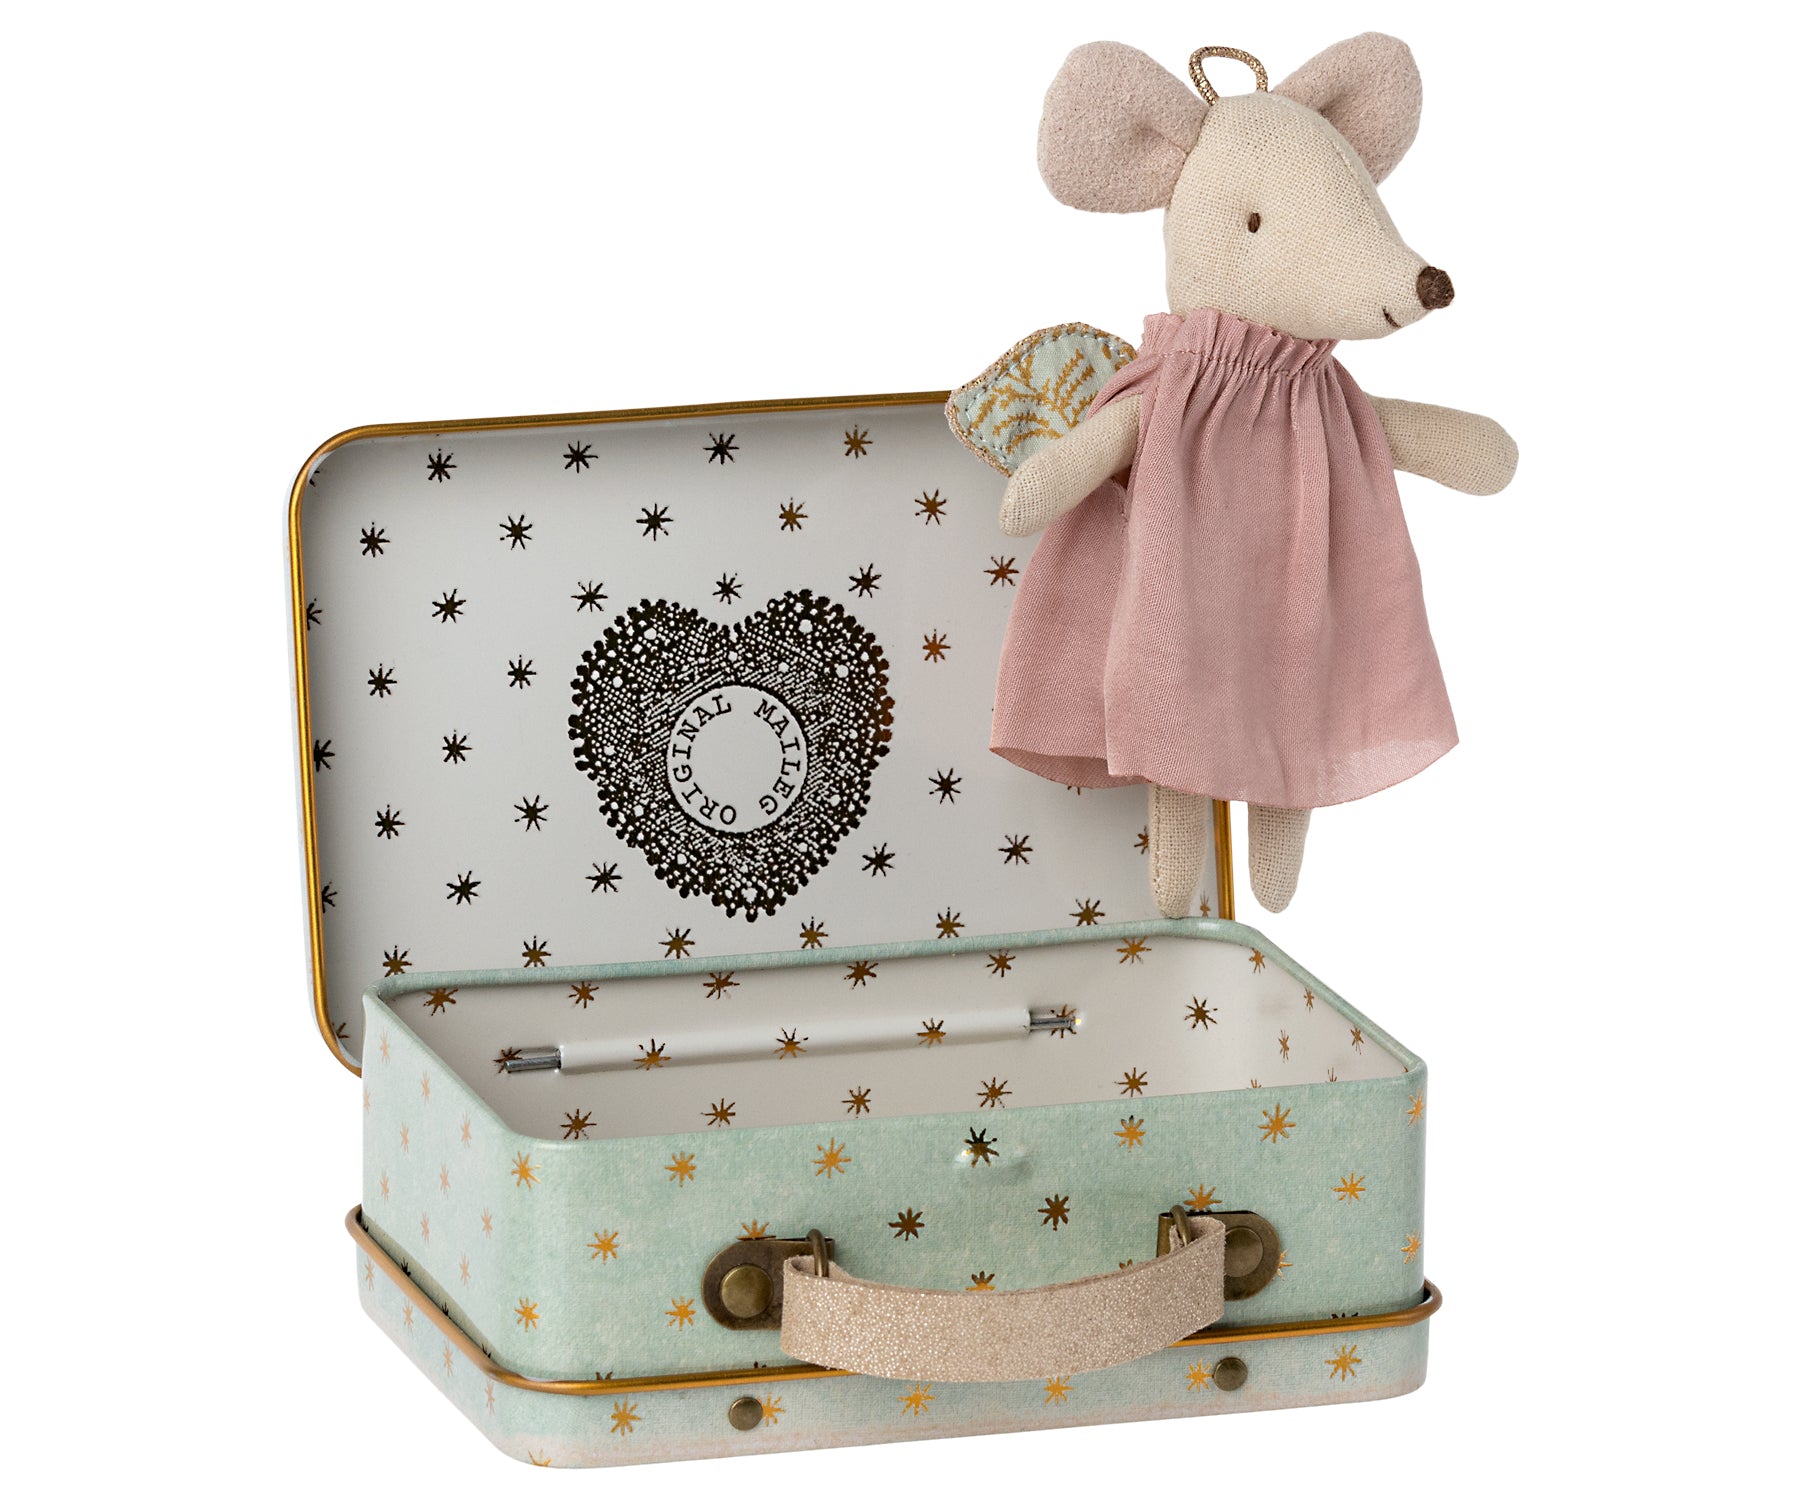 Maileg Guardian Angel Mouse in Suitcase – Little Sister